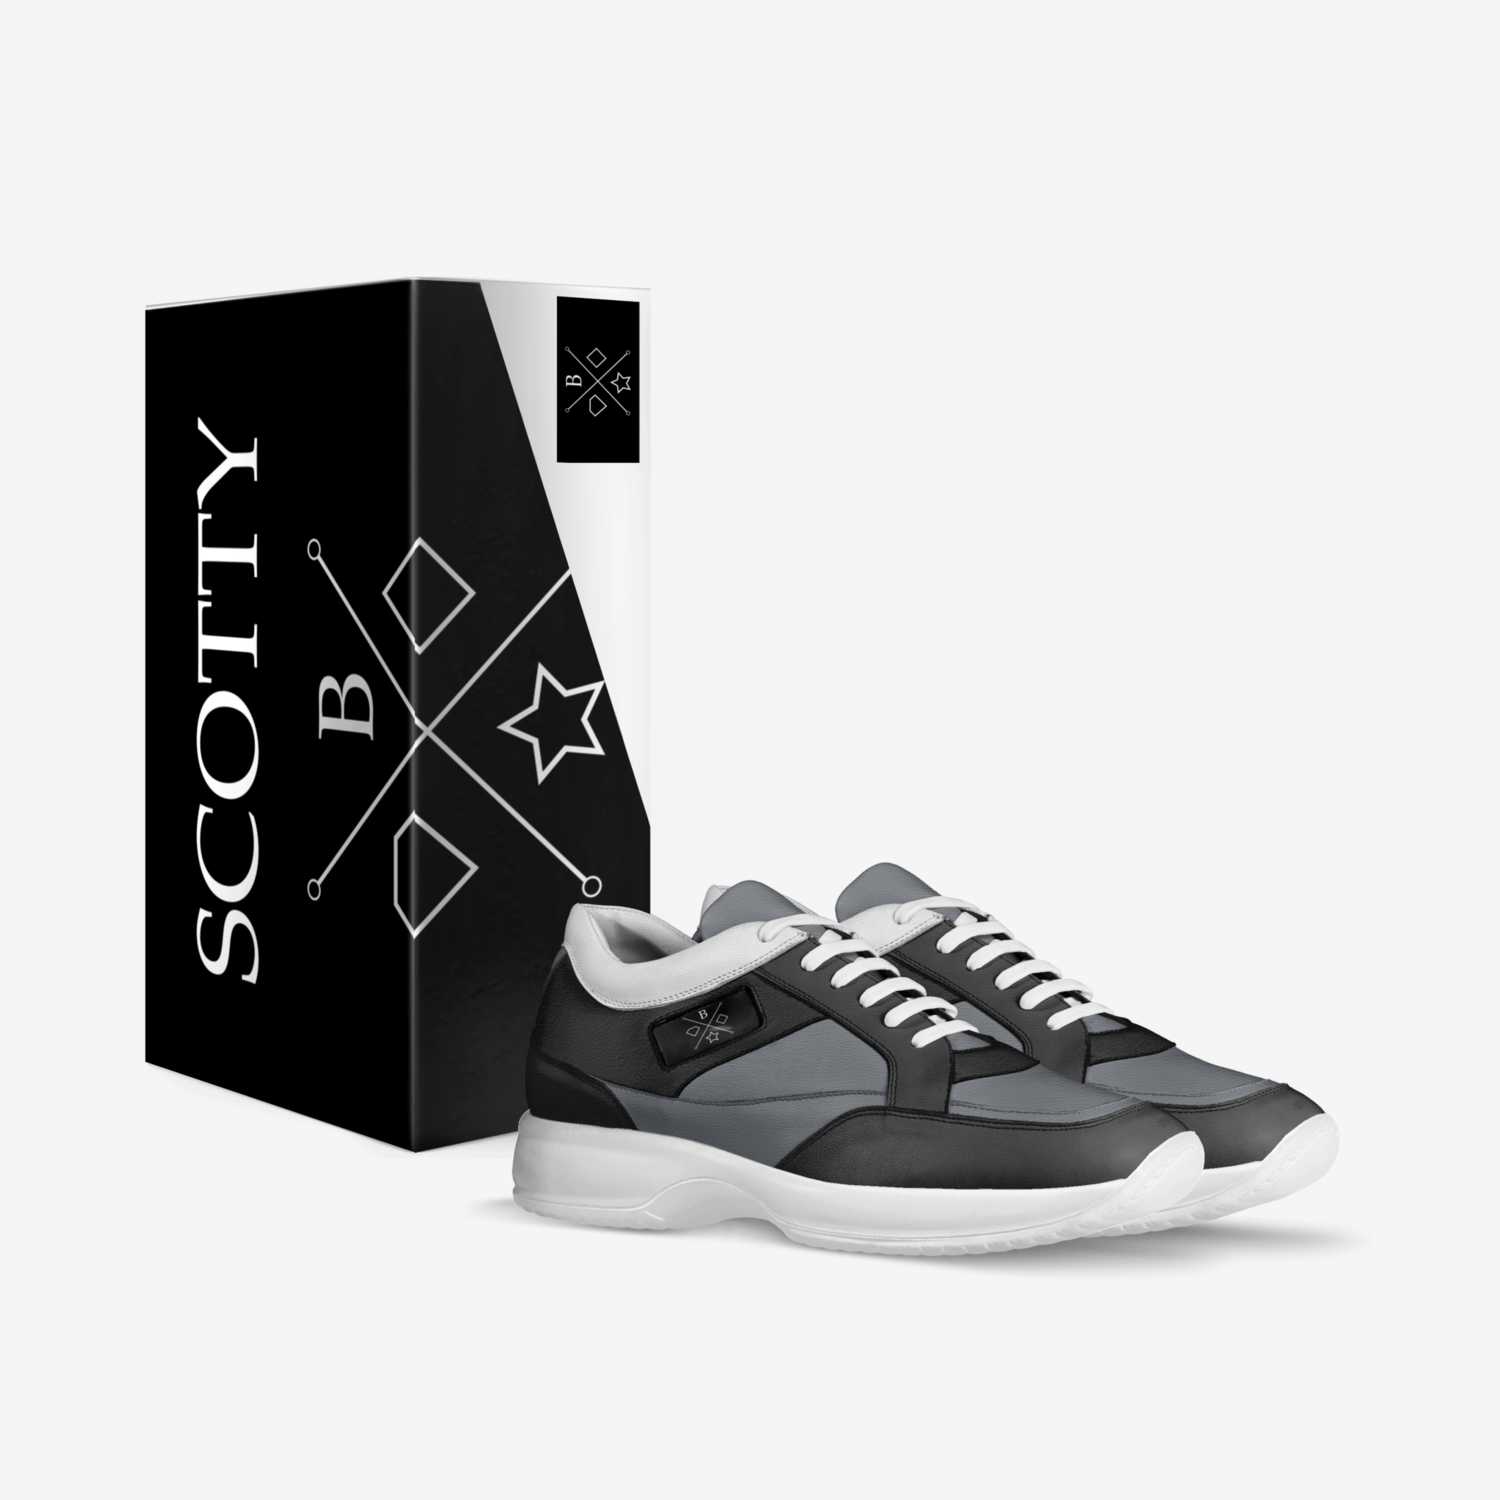 SCOTTY  custom made in Italy shoes by Brandon Scott | Box view